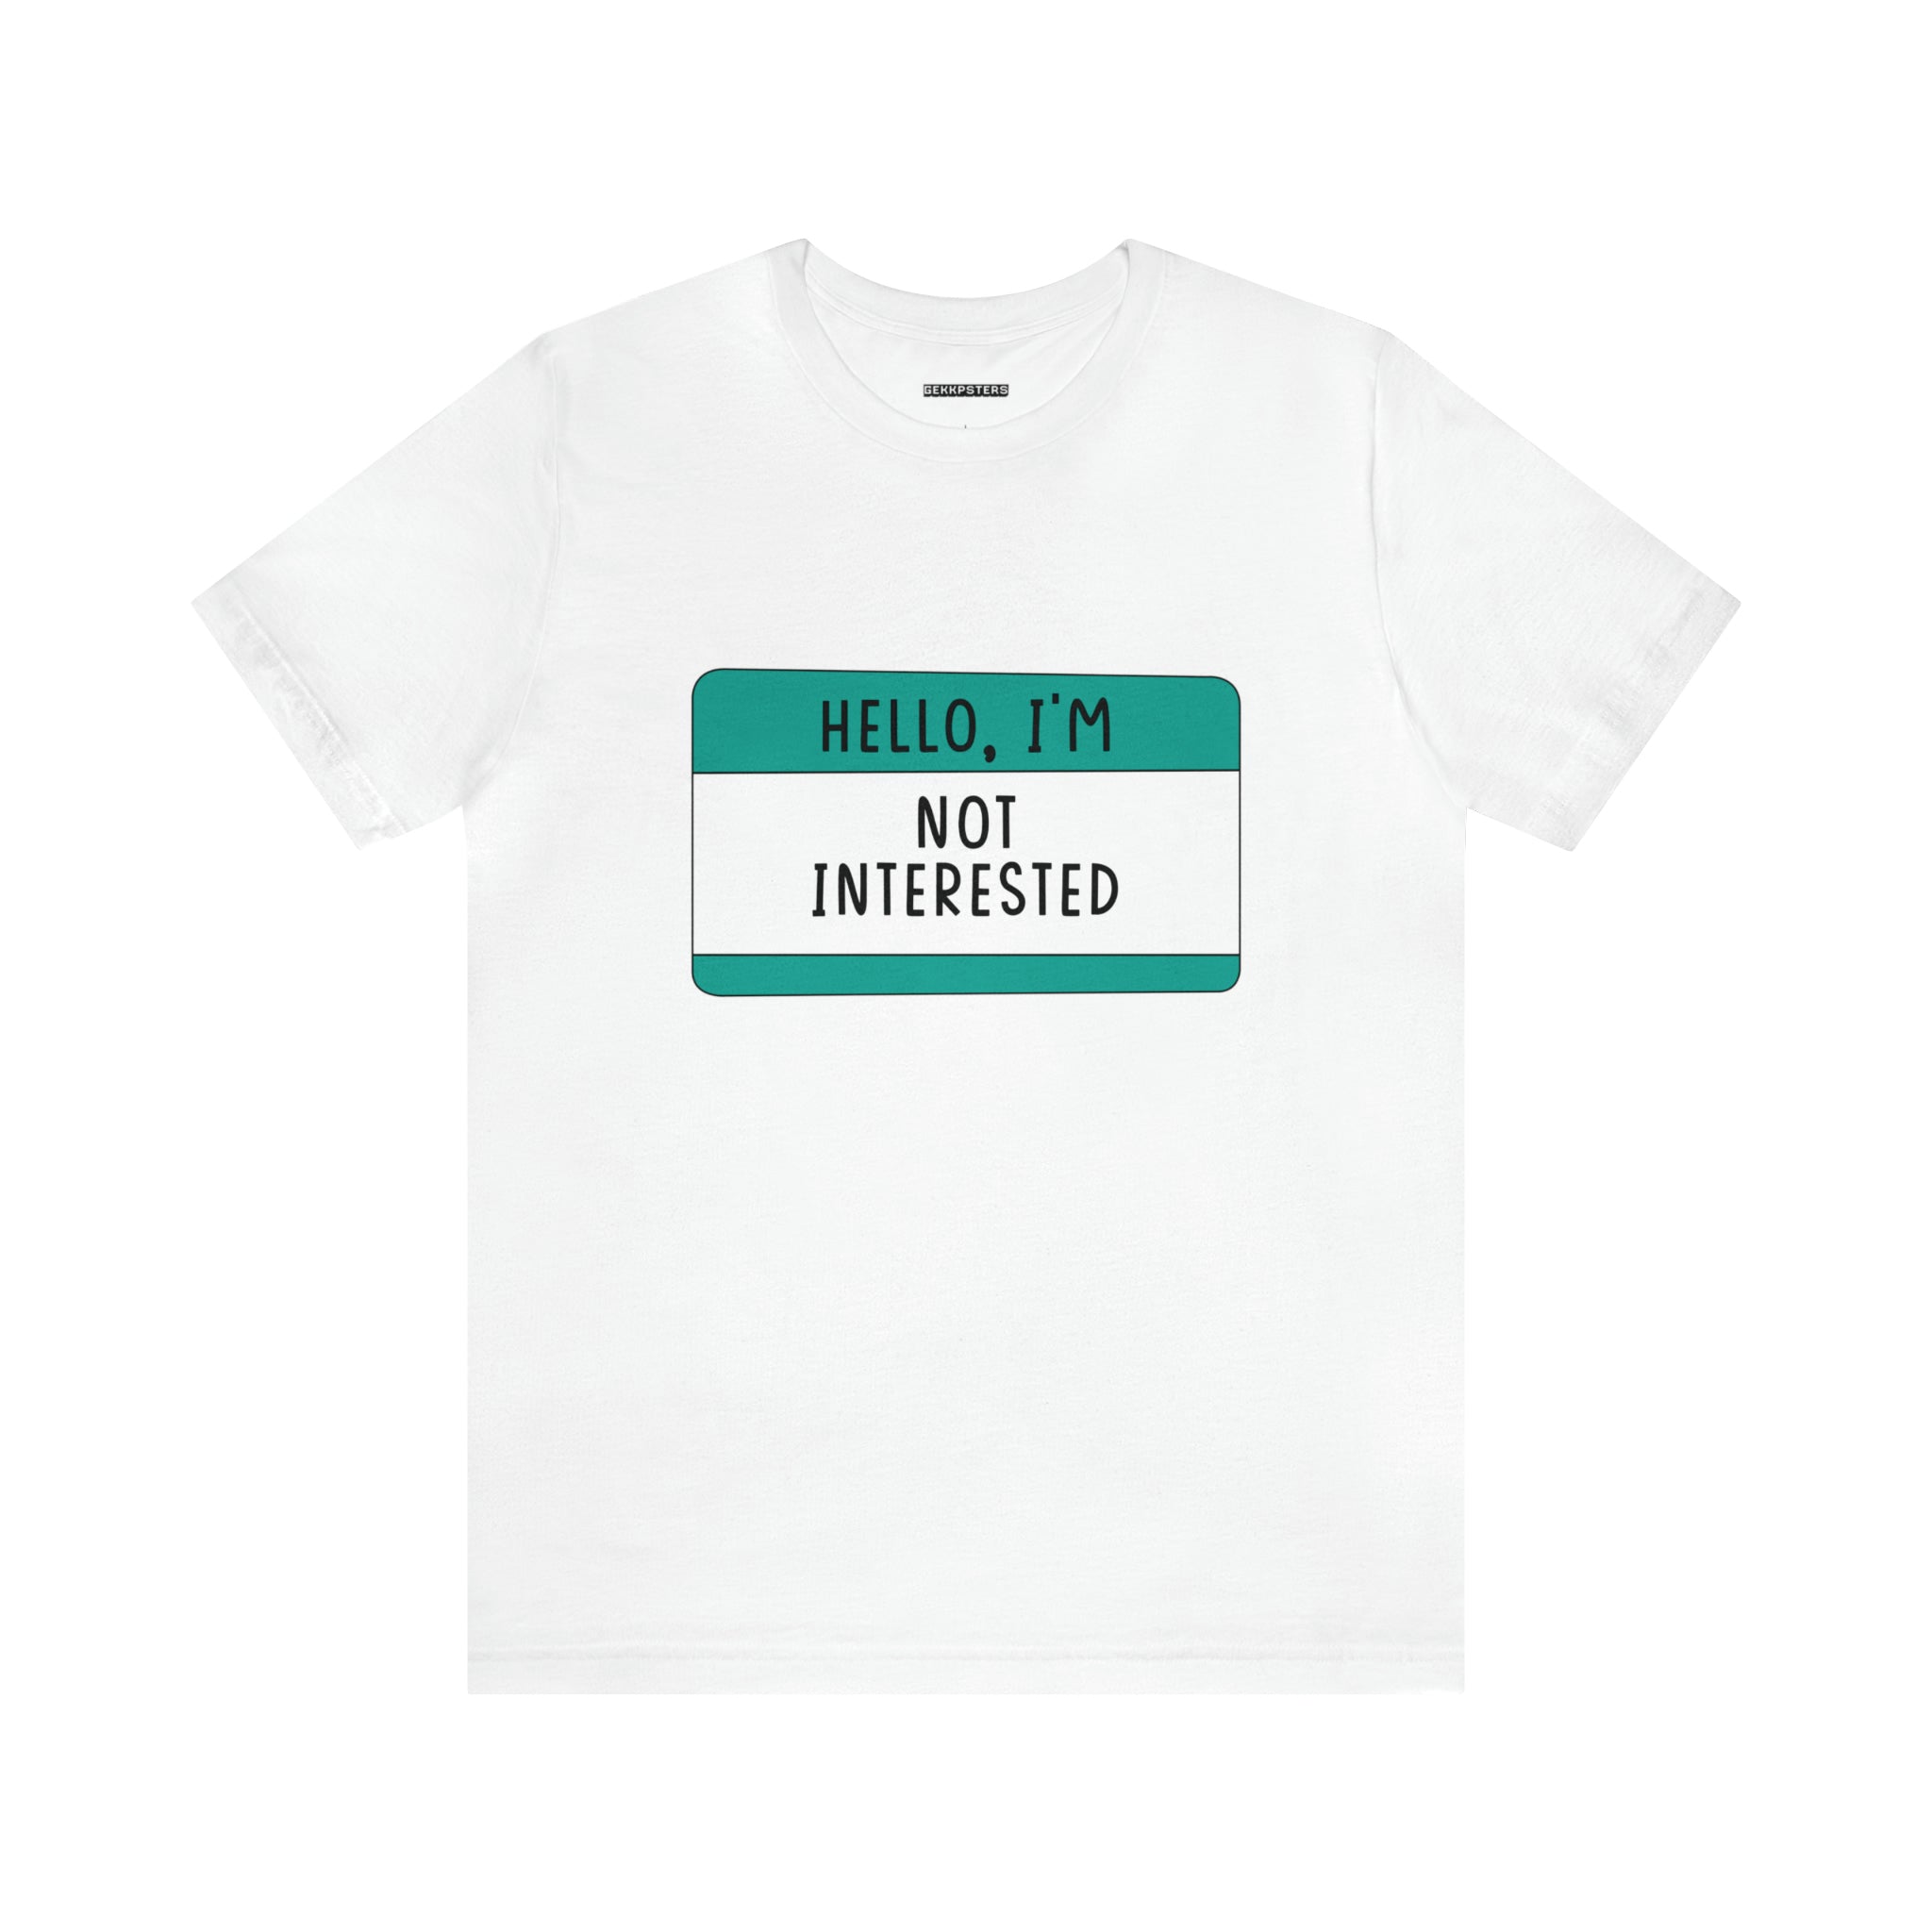 Hello, I'm not interested in Hello, I'm Not Interested T-Shirts.